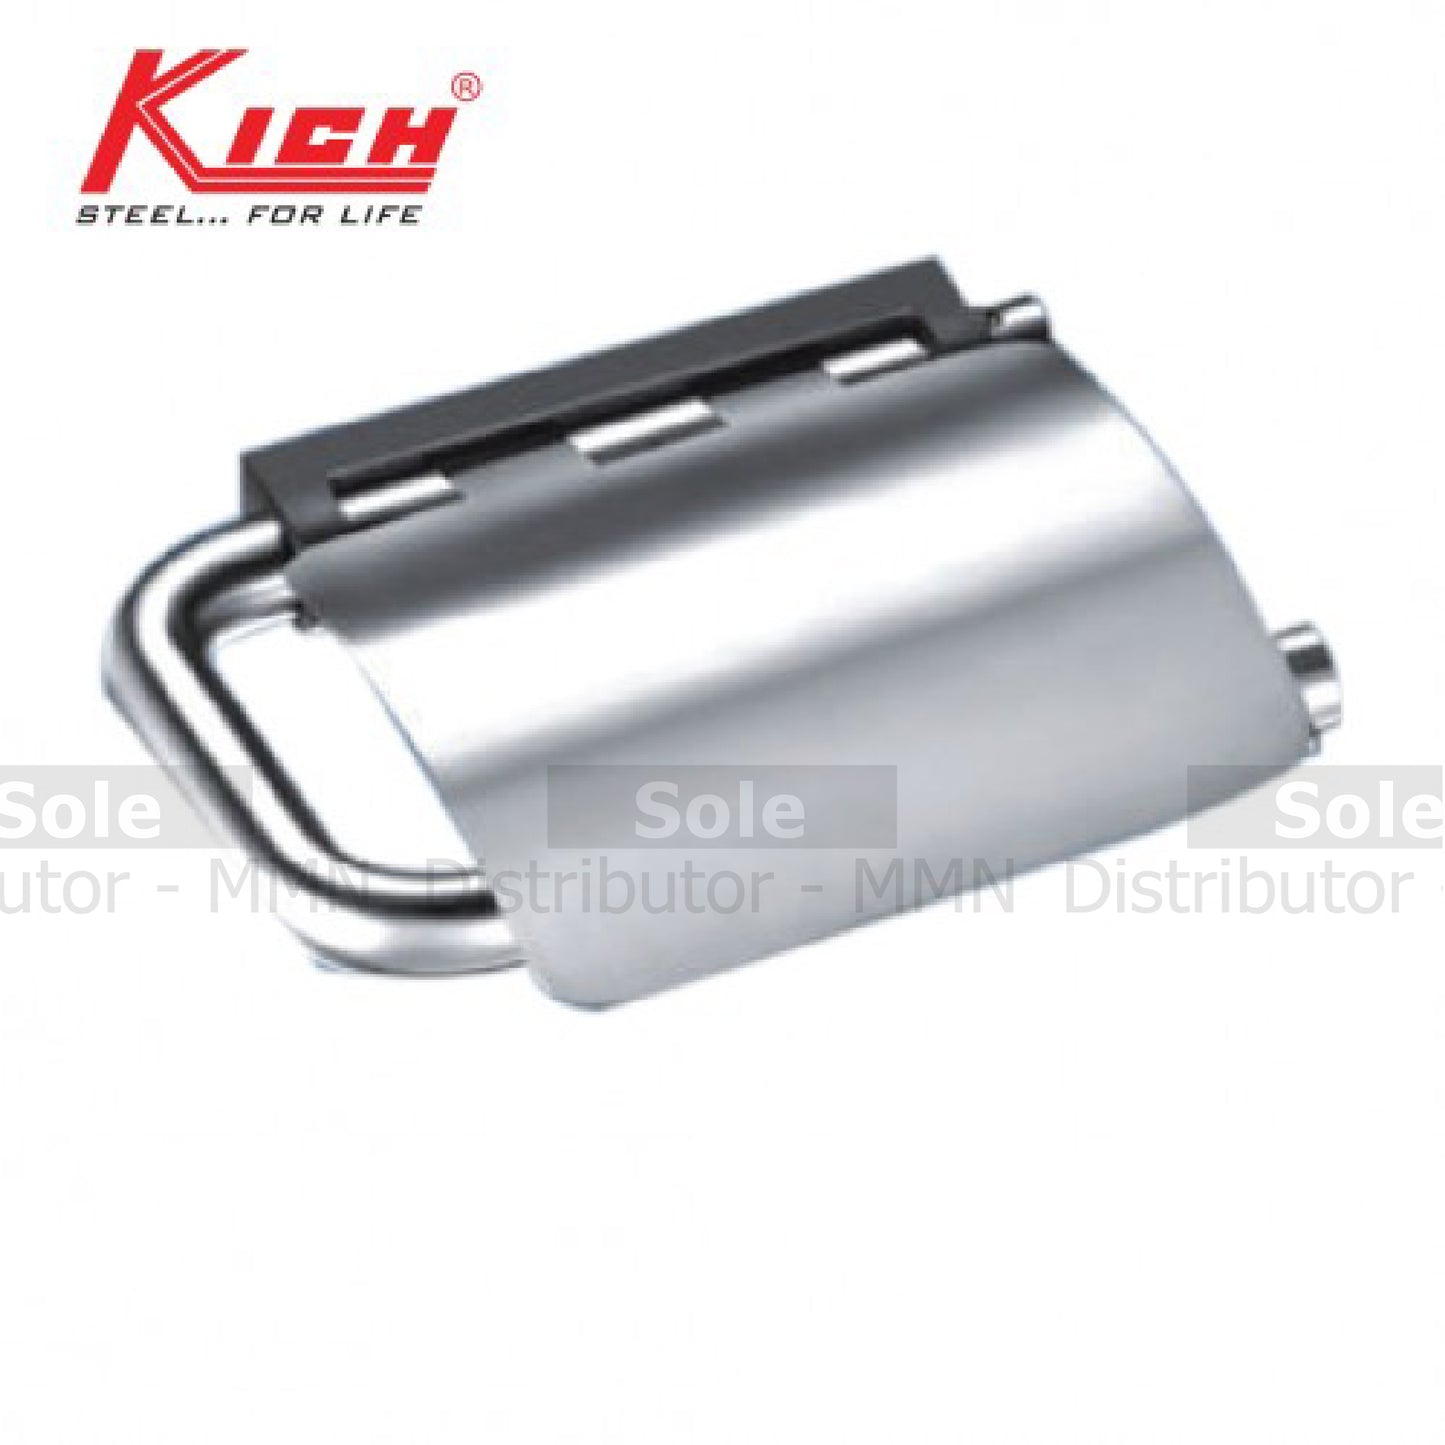 Kich Toilet Paper Roll Holder With Flap, Size 82x117x156mm, AISI Corrosion Resistance Stainless Steel 316 Grade, Matt & Glossy Finish -KTTPHF